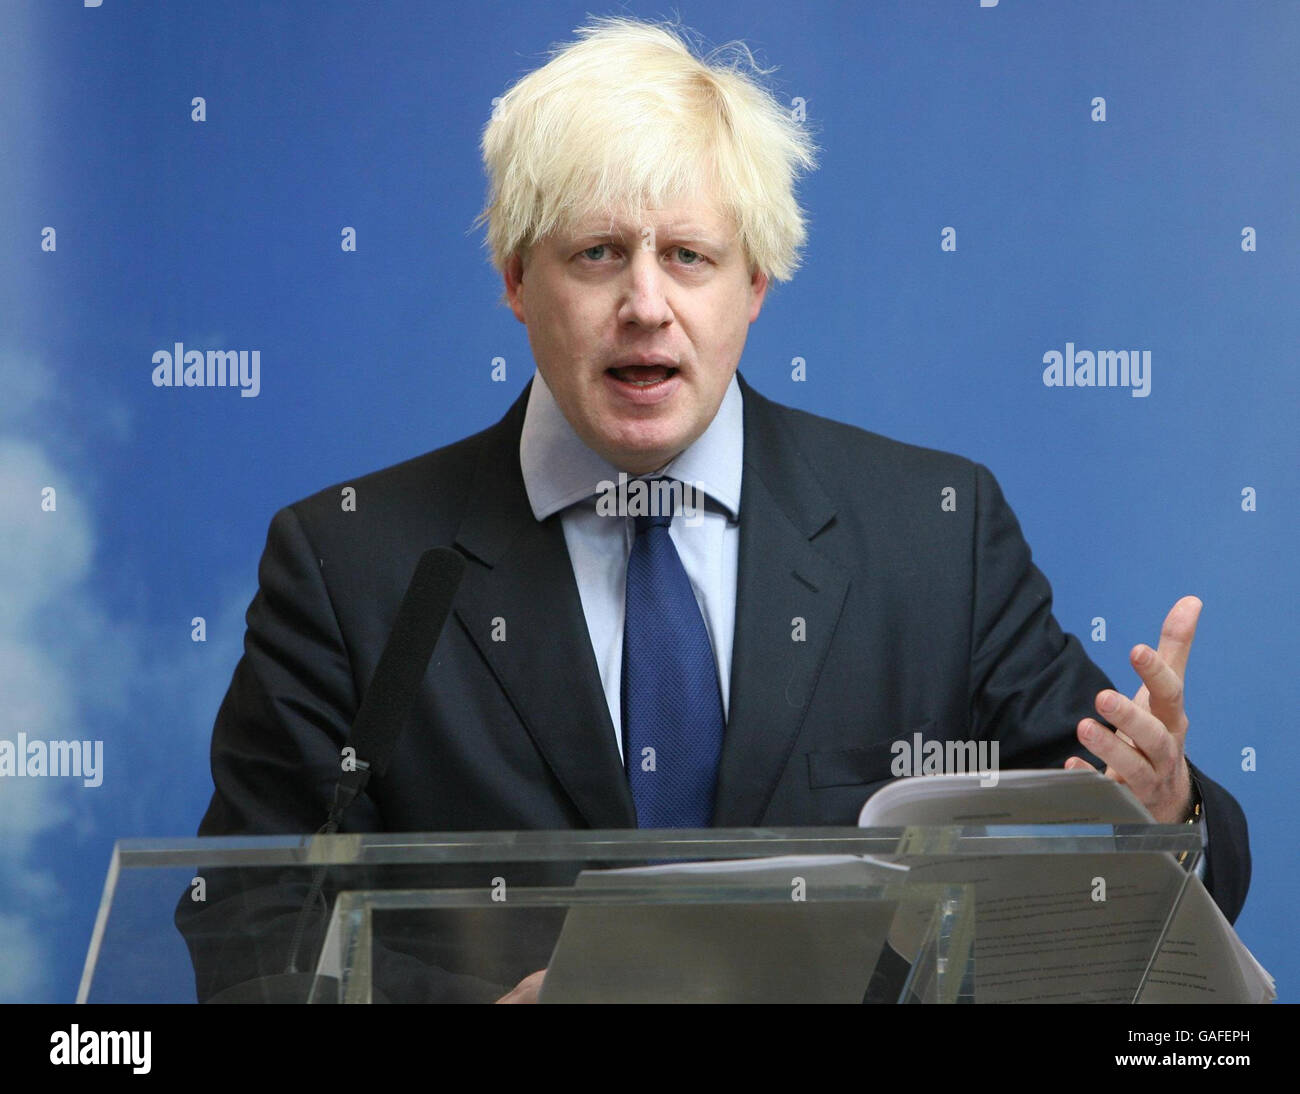 The Conservative Candidate for Mayor of London, Boris Johnson, announces his proposal to reform the existing London Health Commission and ring-fence London's spending on public health at the Ideas Space in central London. Stock Photo